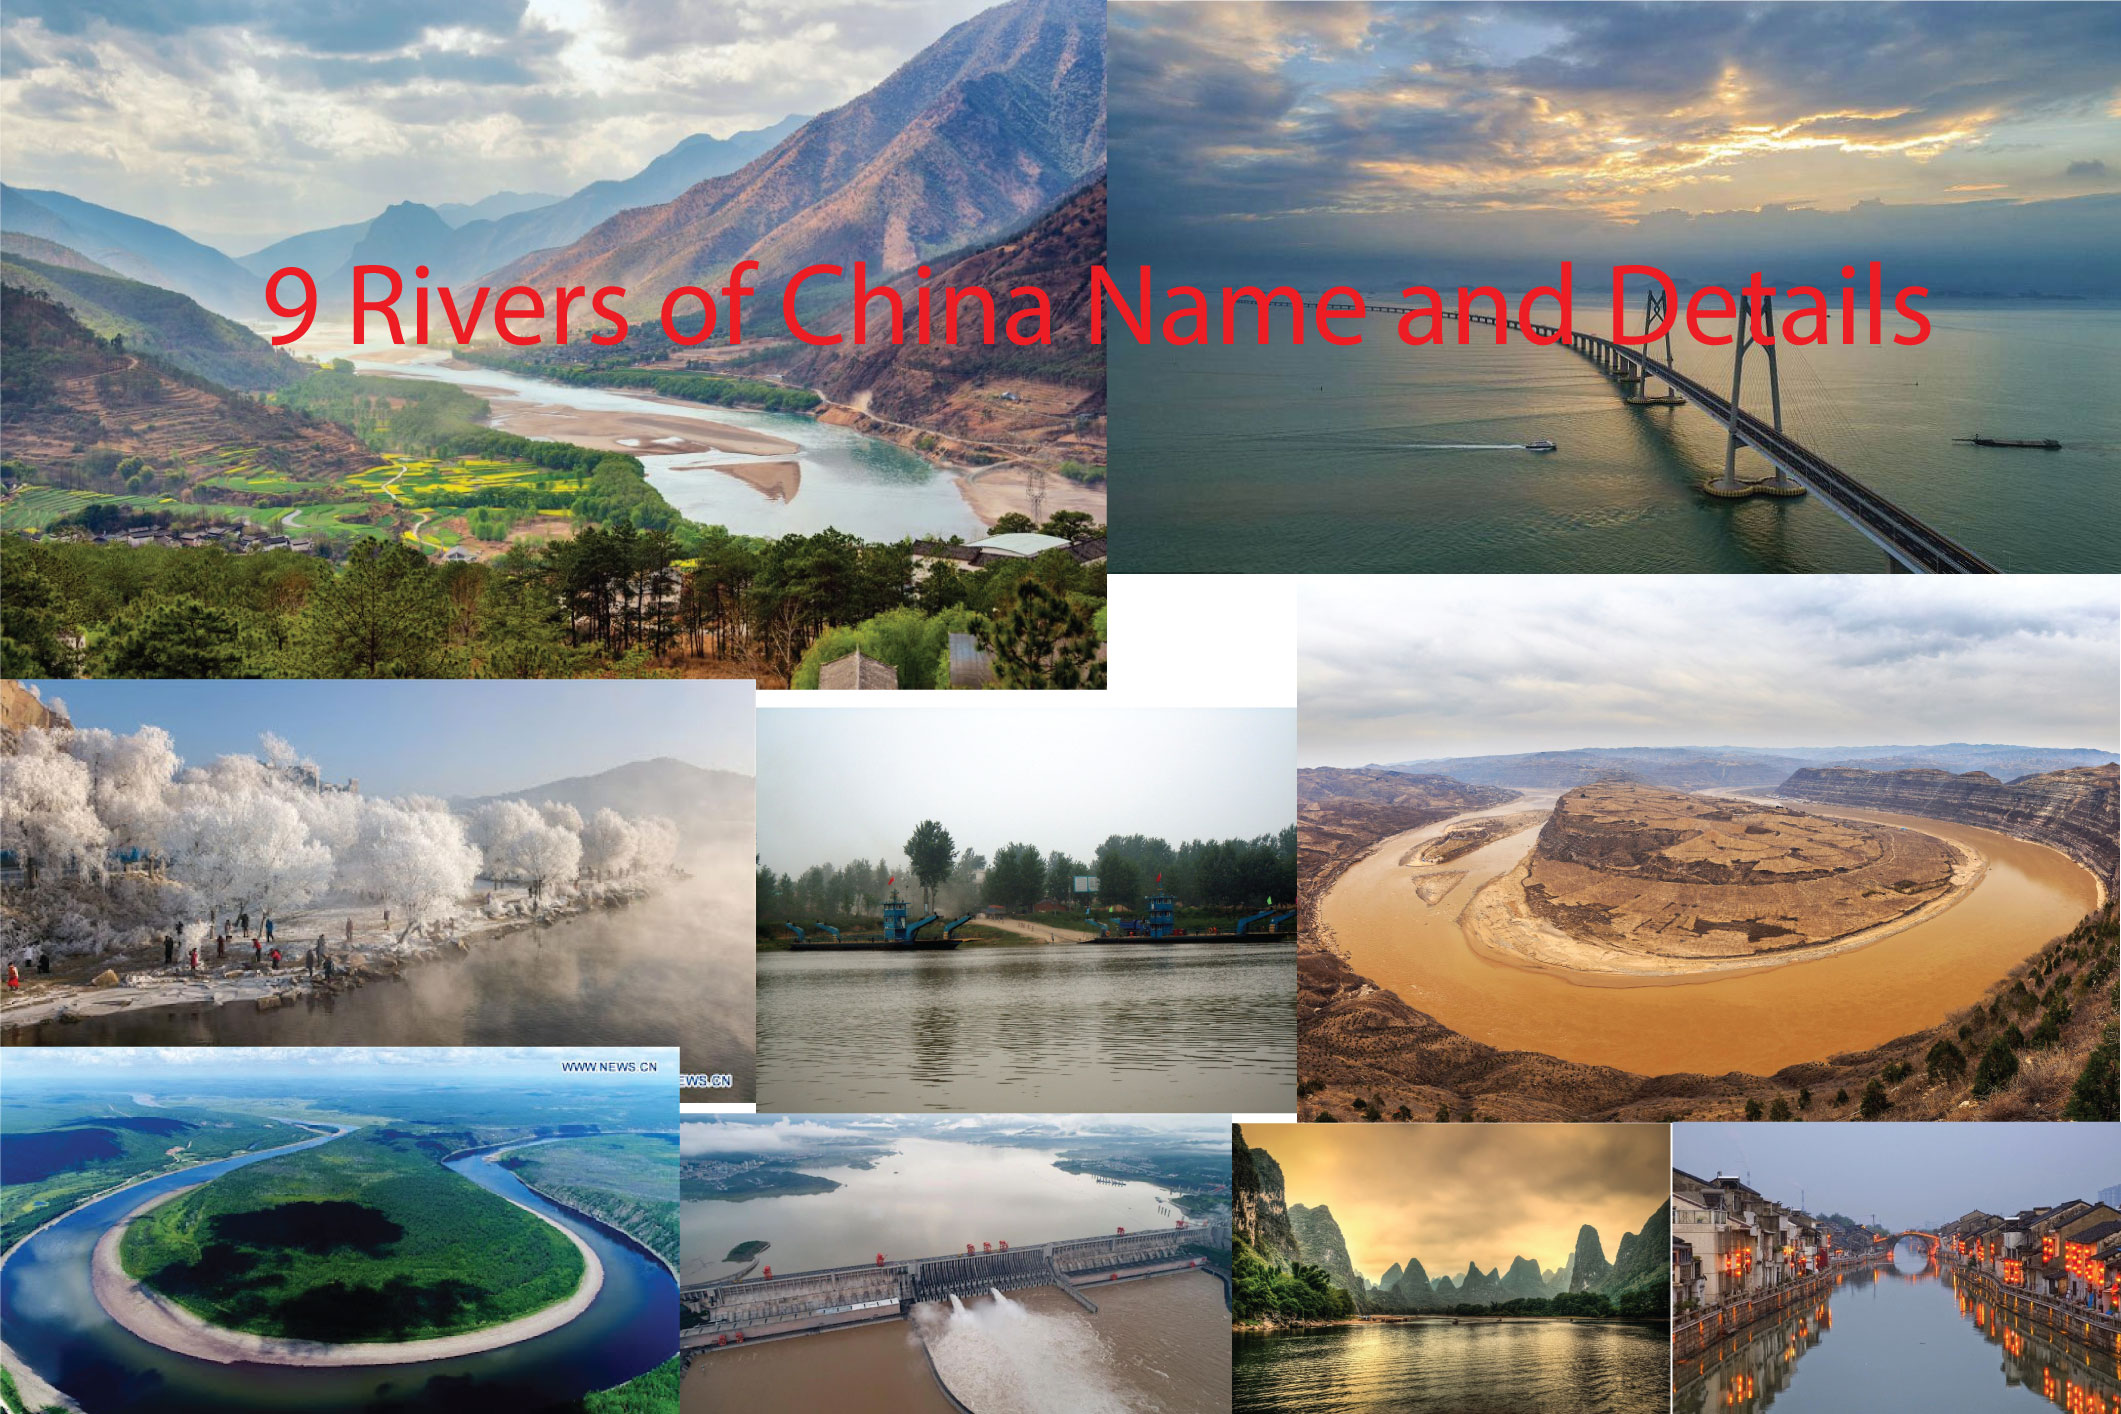 9 Rivers of China Name and Details